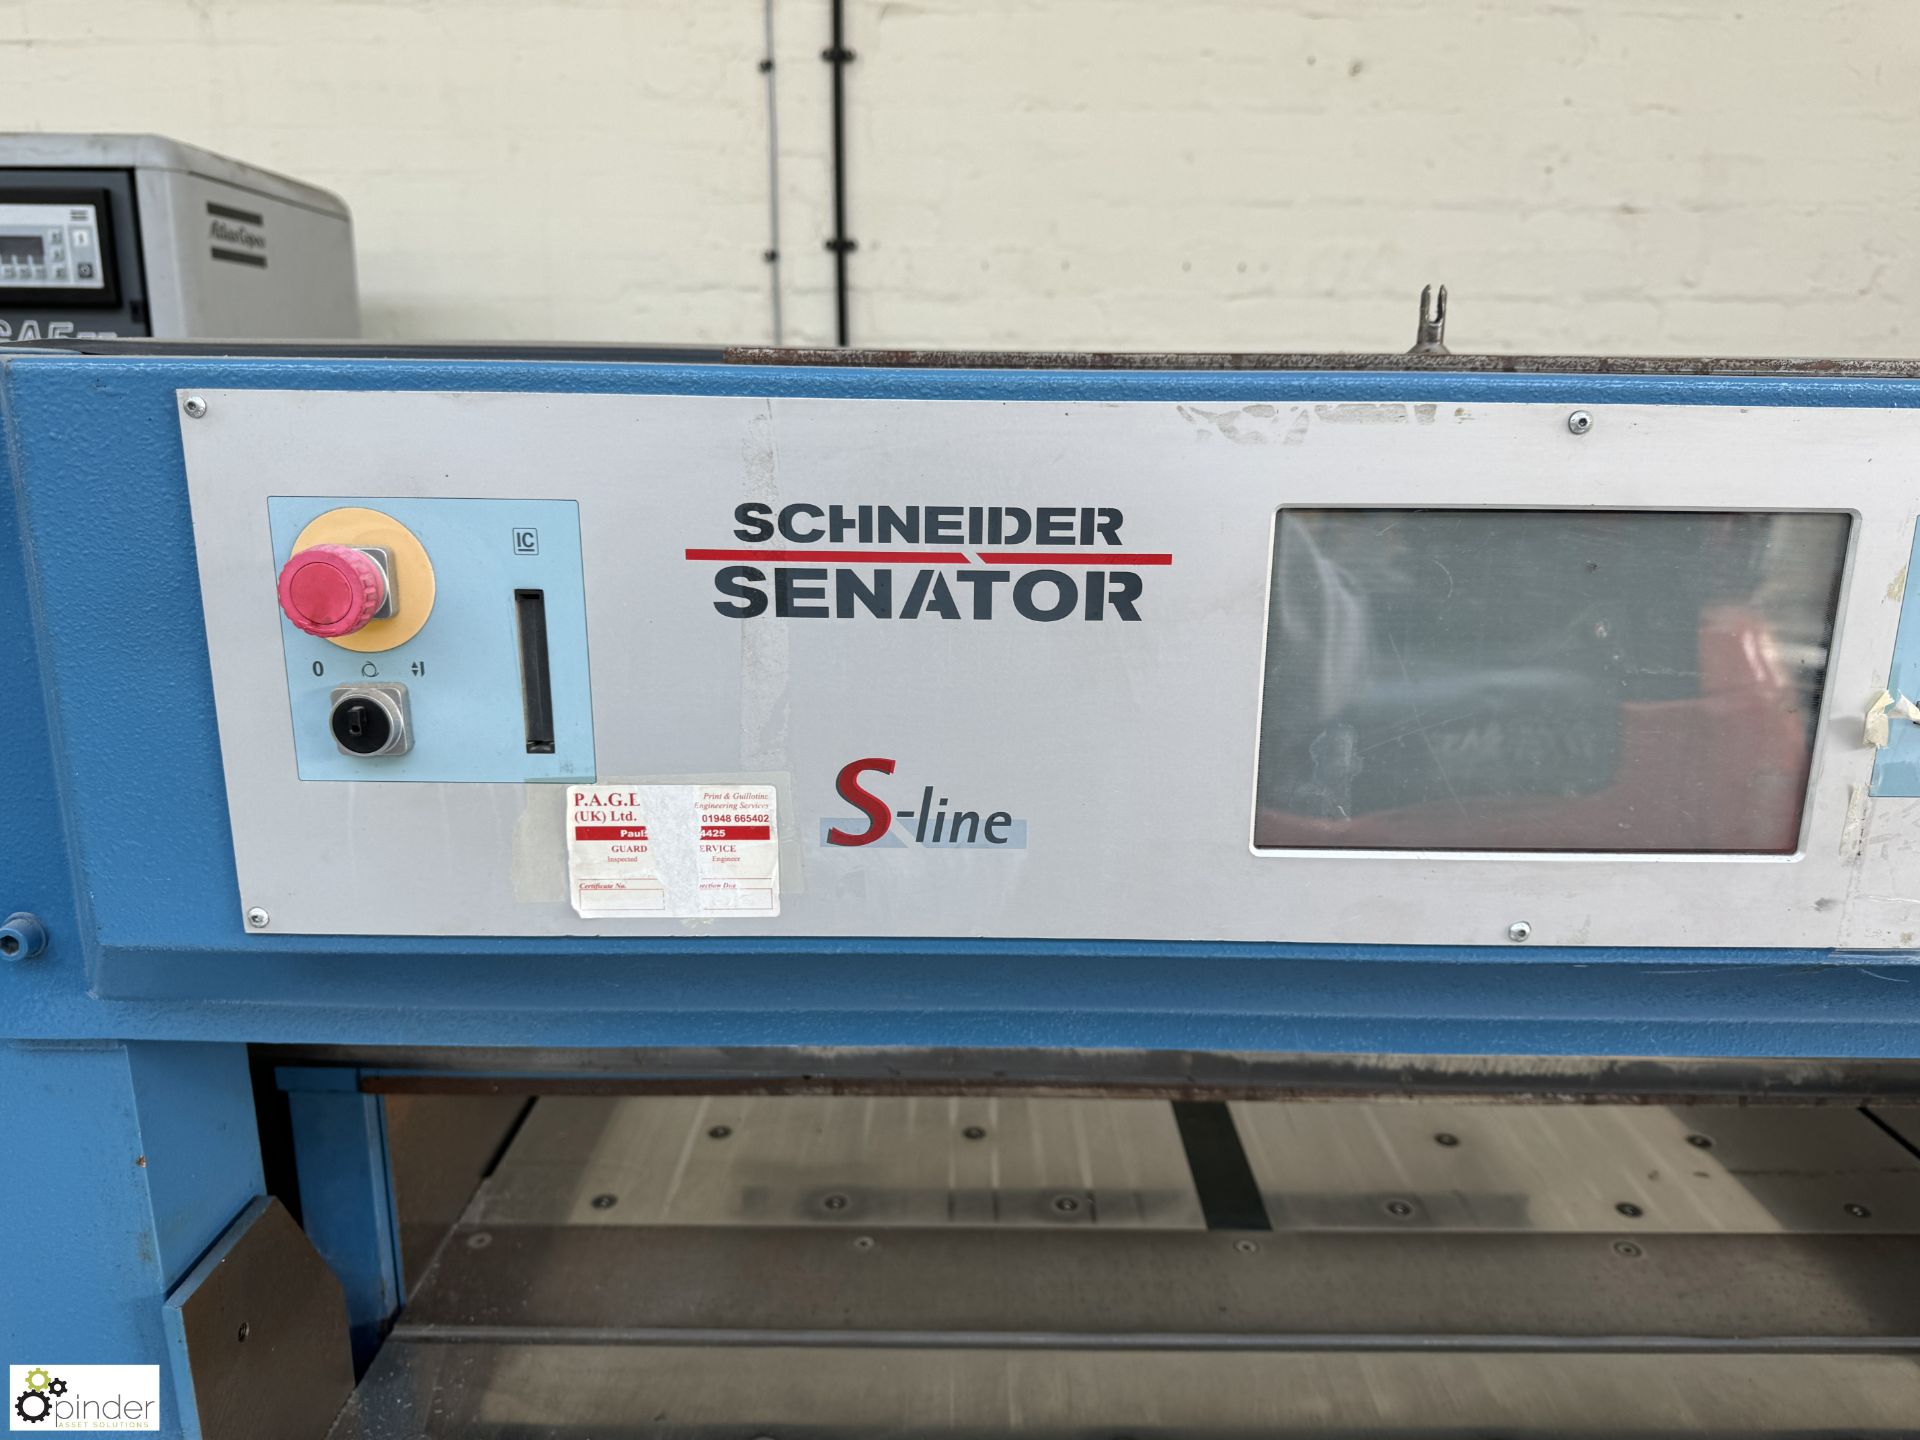 Schneider Senator S-Line 115 TSC Guillotine, 115cm, 400volts, year 1997, serial number M-115H-004- - Image 5 of 14